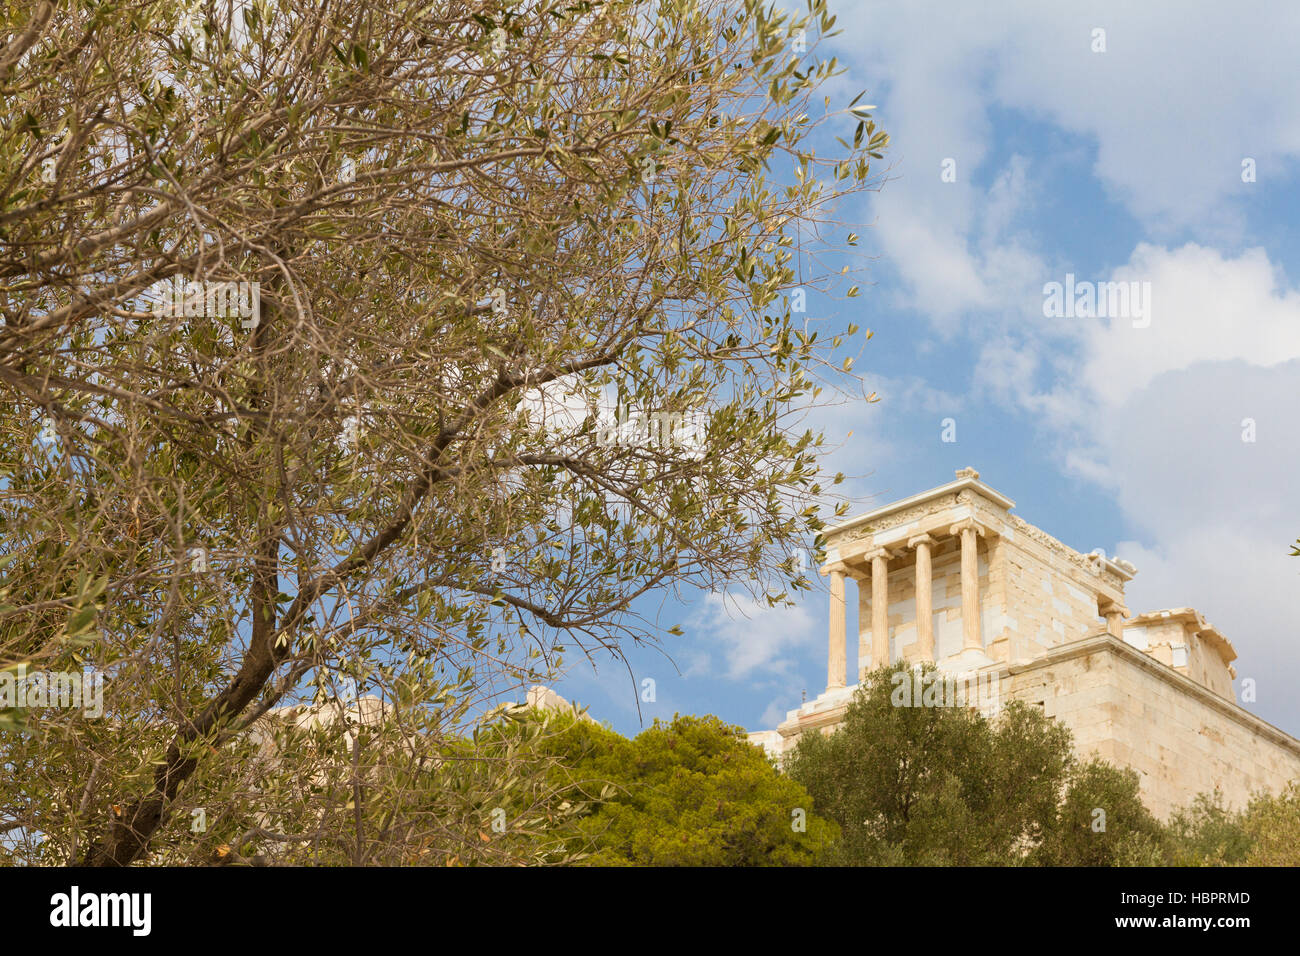 The Acropolis of Athens in Greece behind an olive tree photographed from a low perspective Stock Photo